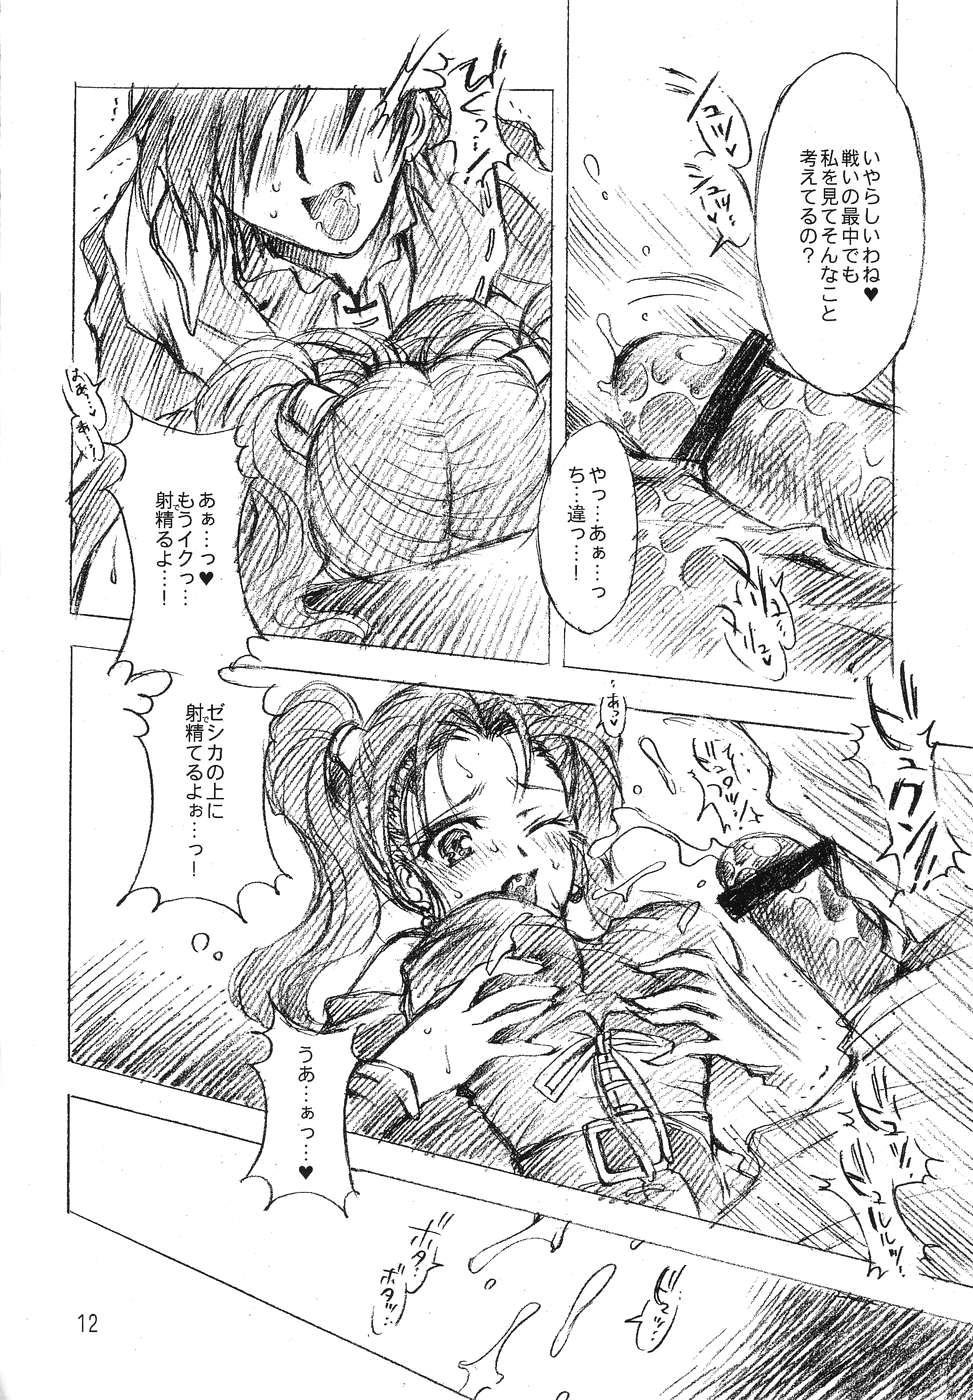 Pounding HESTIA - Dragon quest viii Ejaculations - Page 11